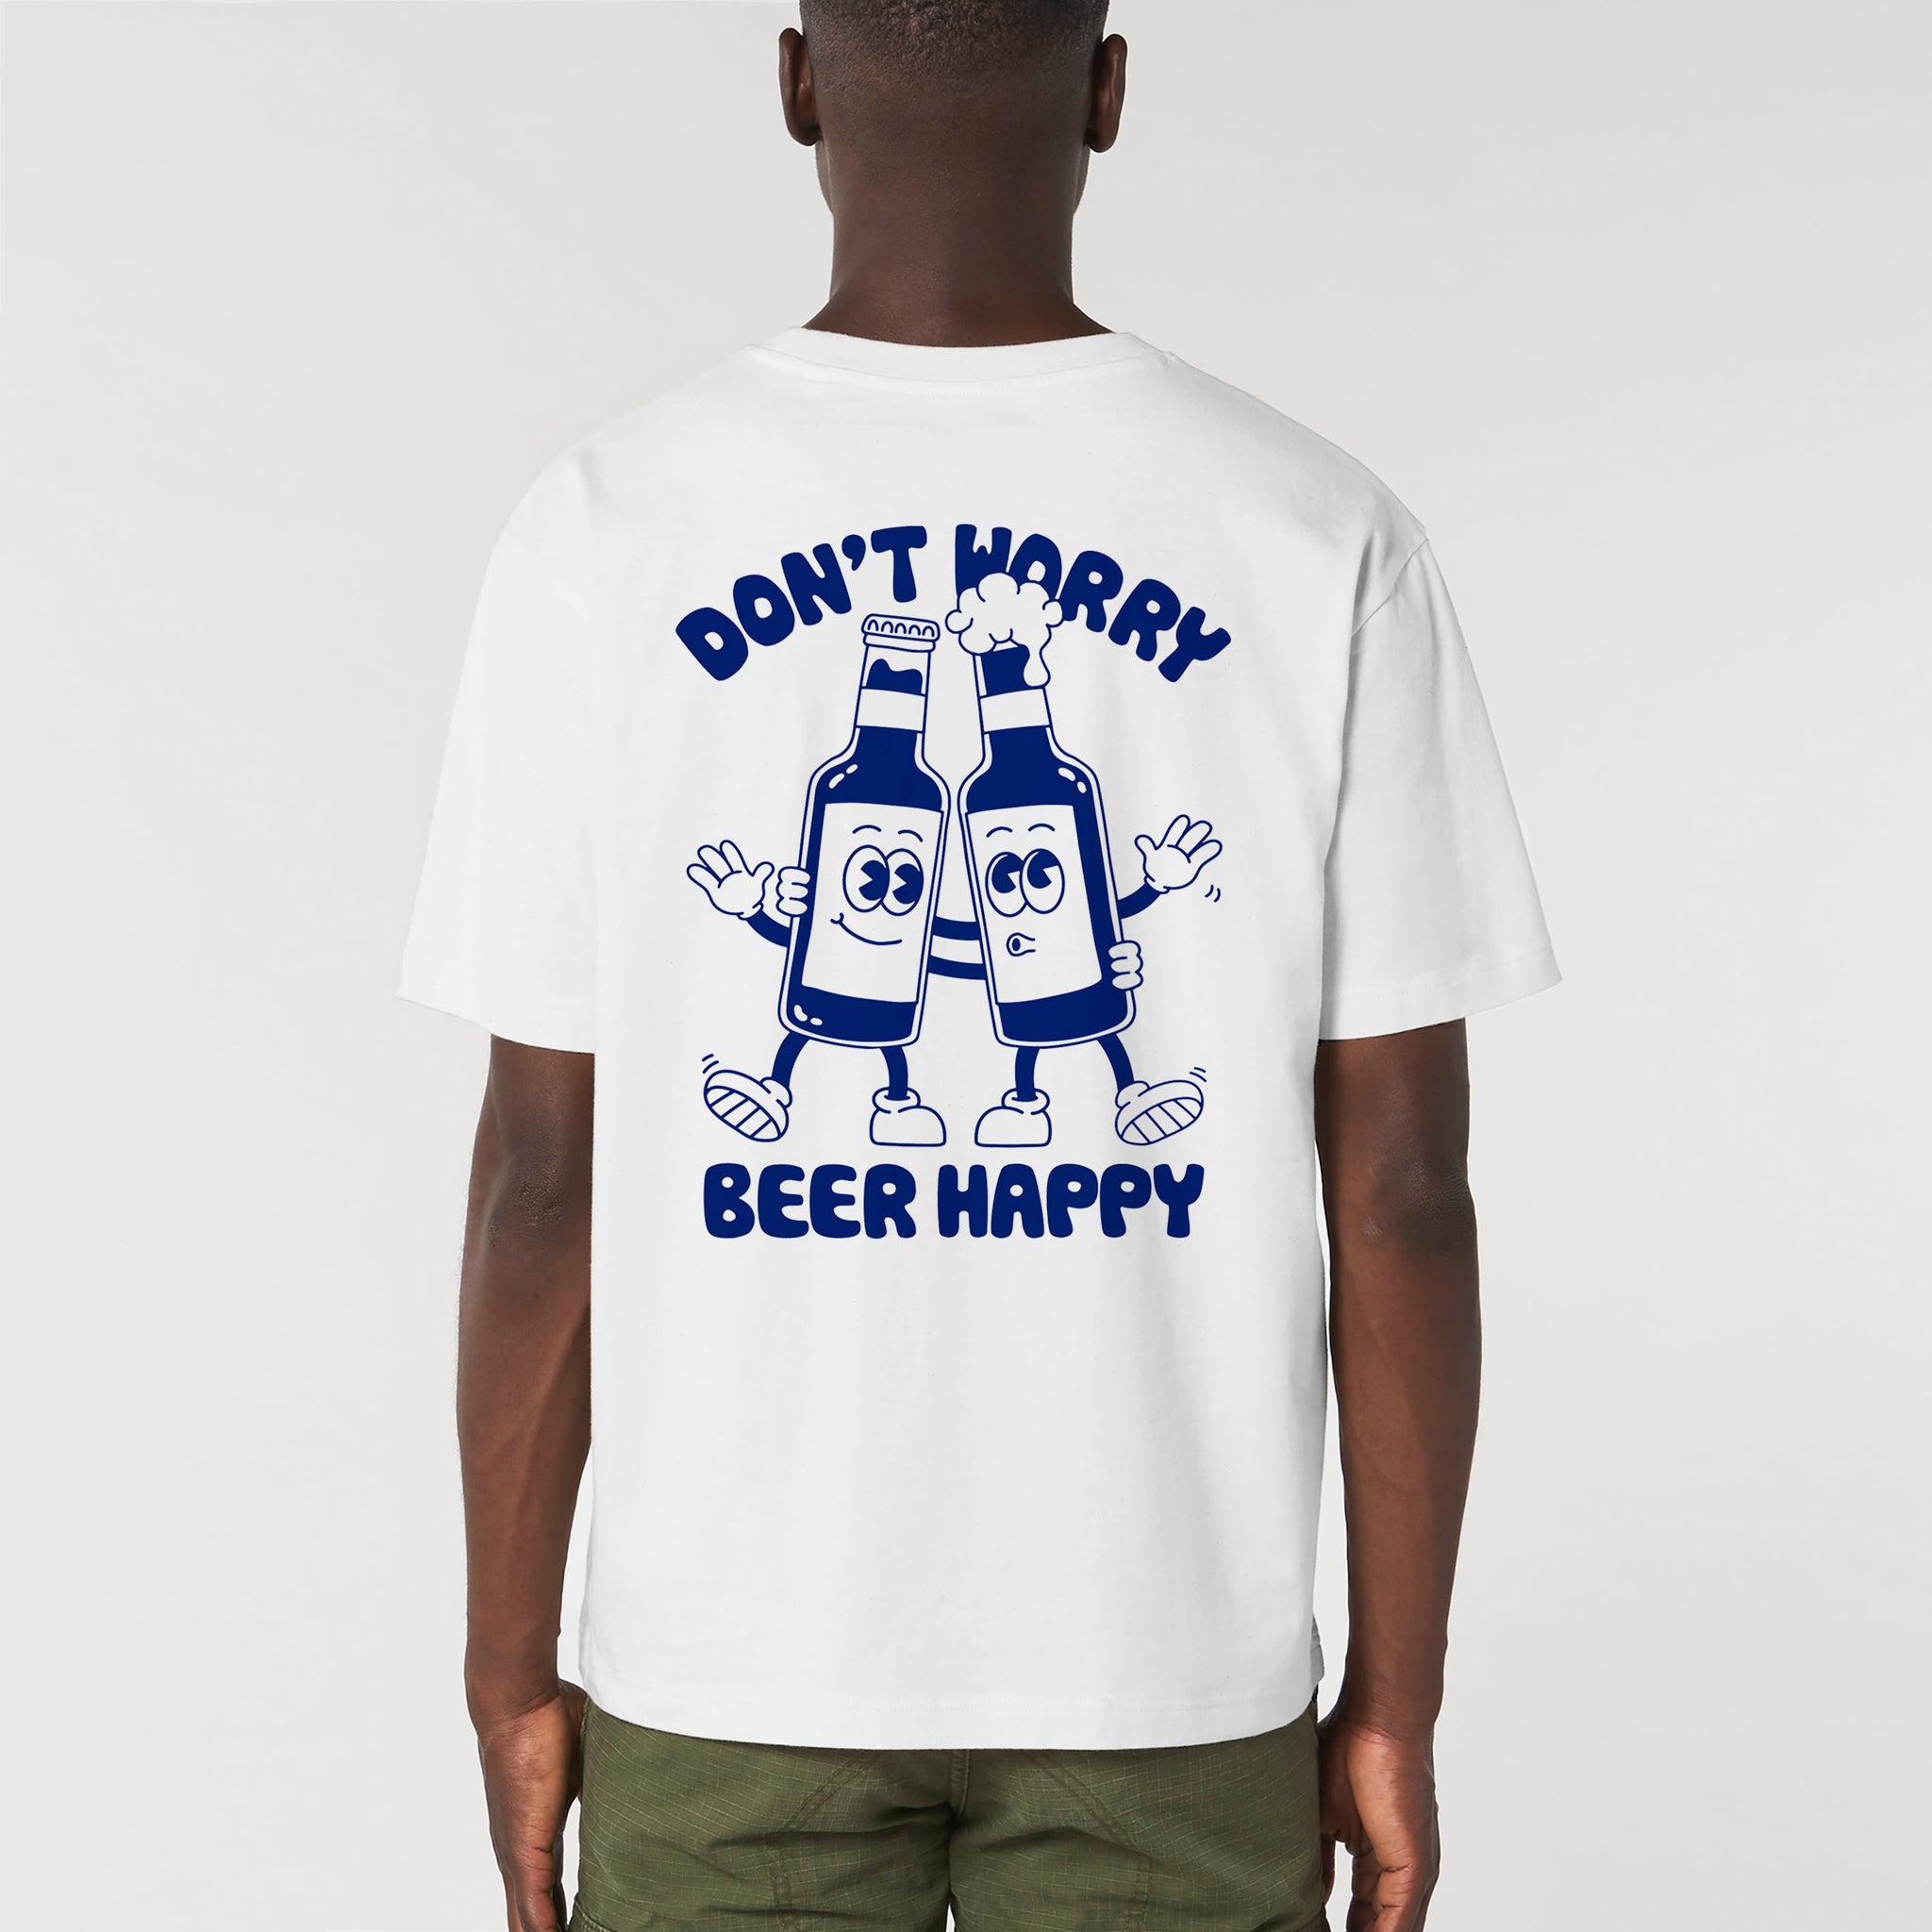 'Don't Worry Beer Happy' Short Sleeve Organic Cotton T-shirt